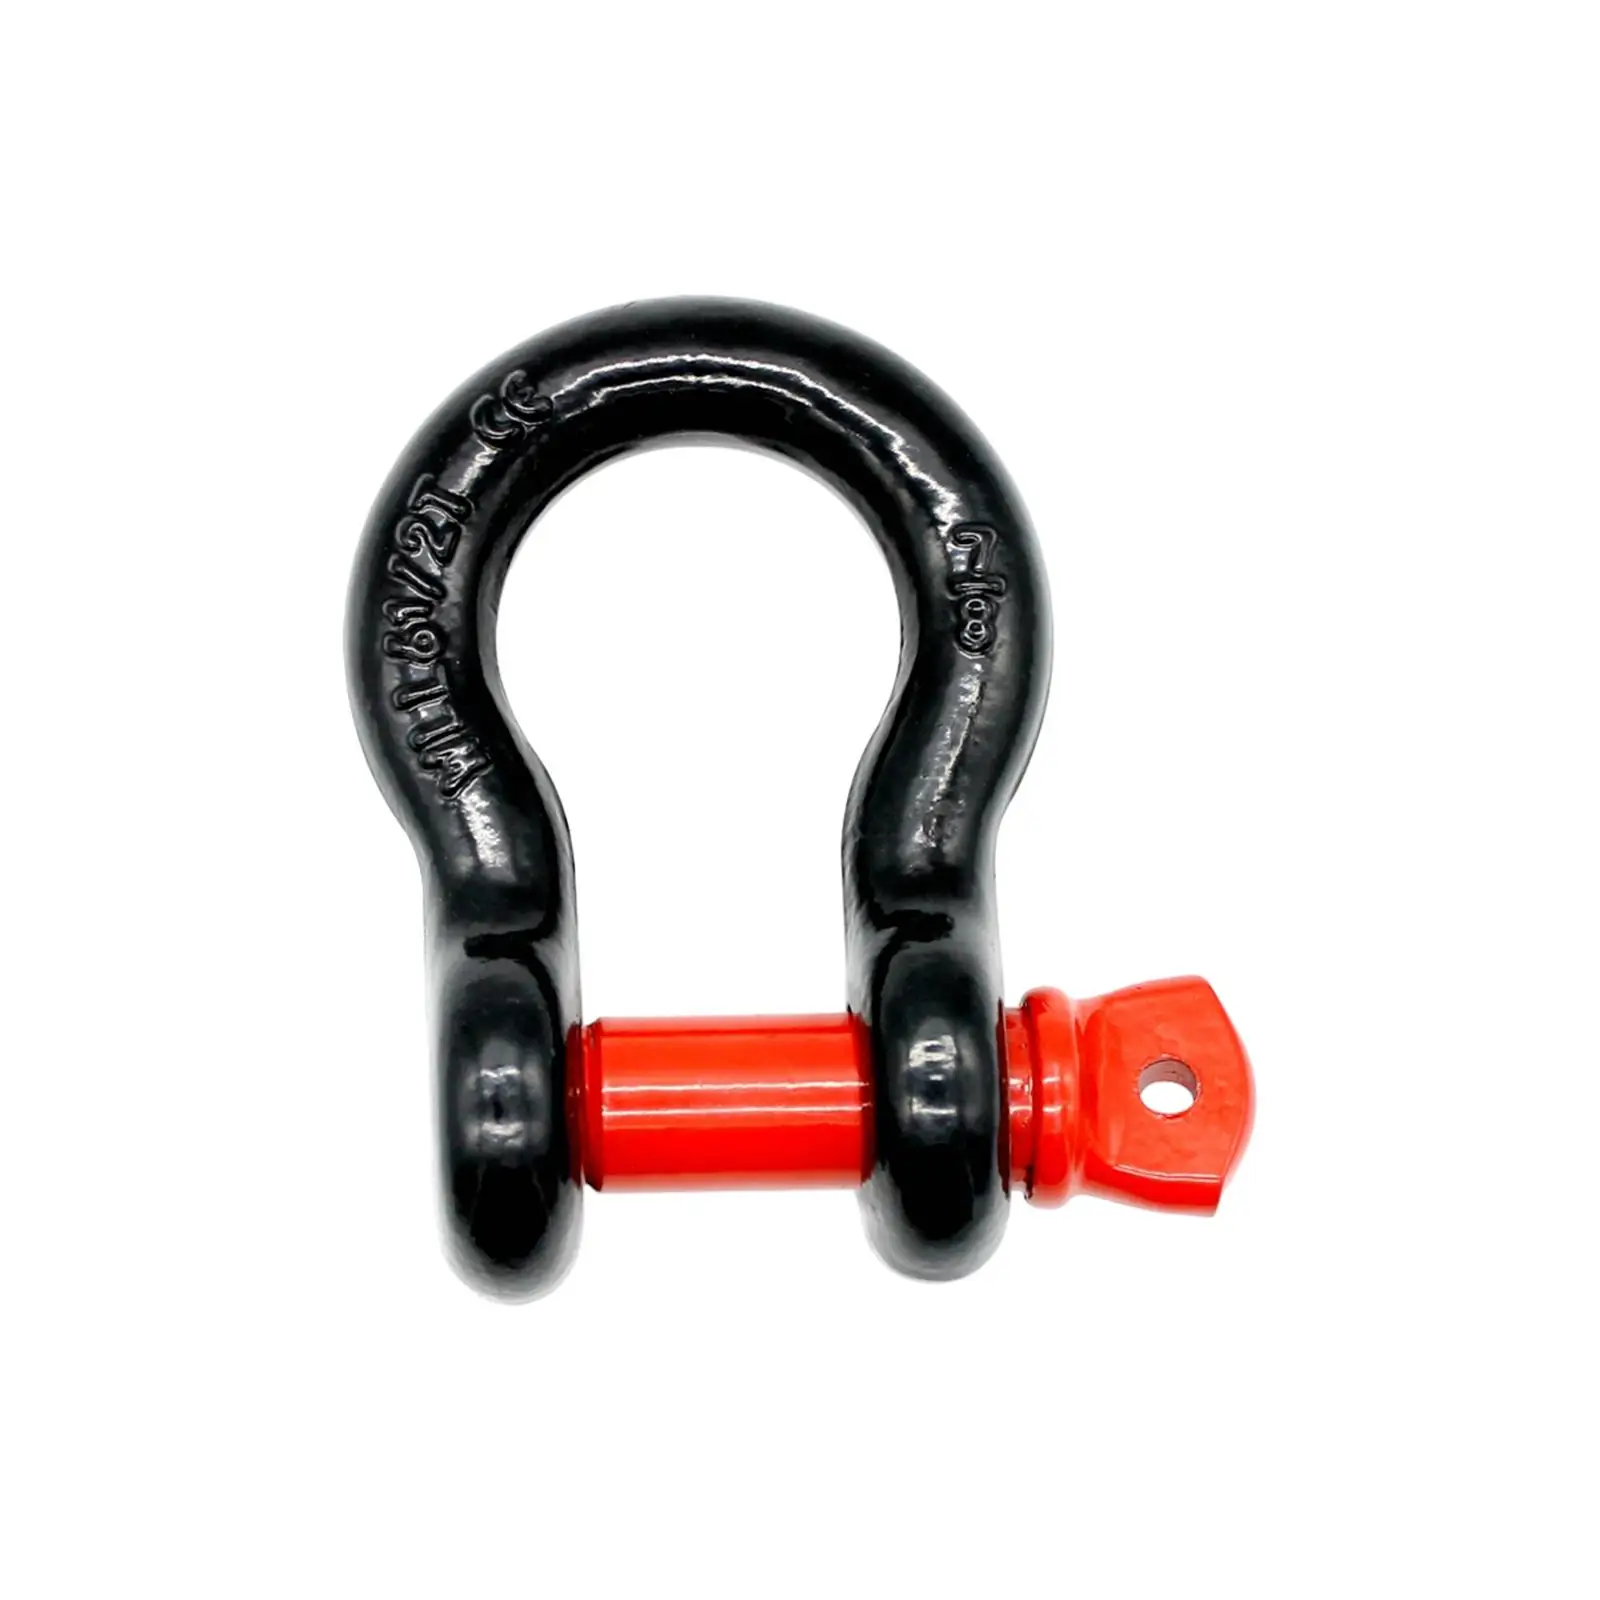 Car Hook Sturdy Heavy Duty D Ring Shackle for Winch Accessories Vehicle Recovery Trailer Hitch Vehicle Wear Resistant